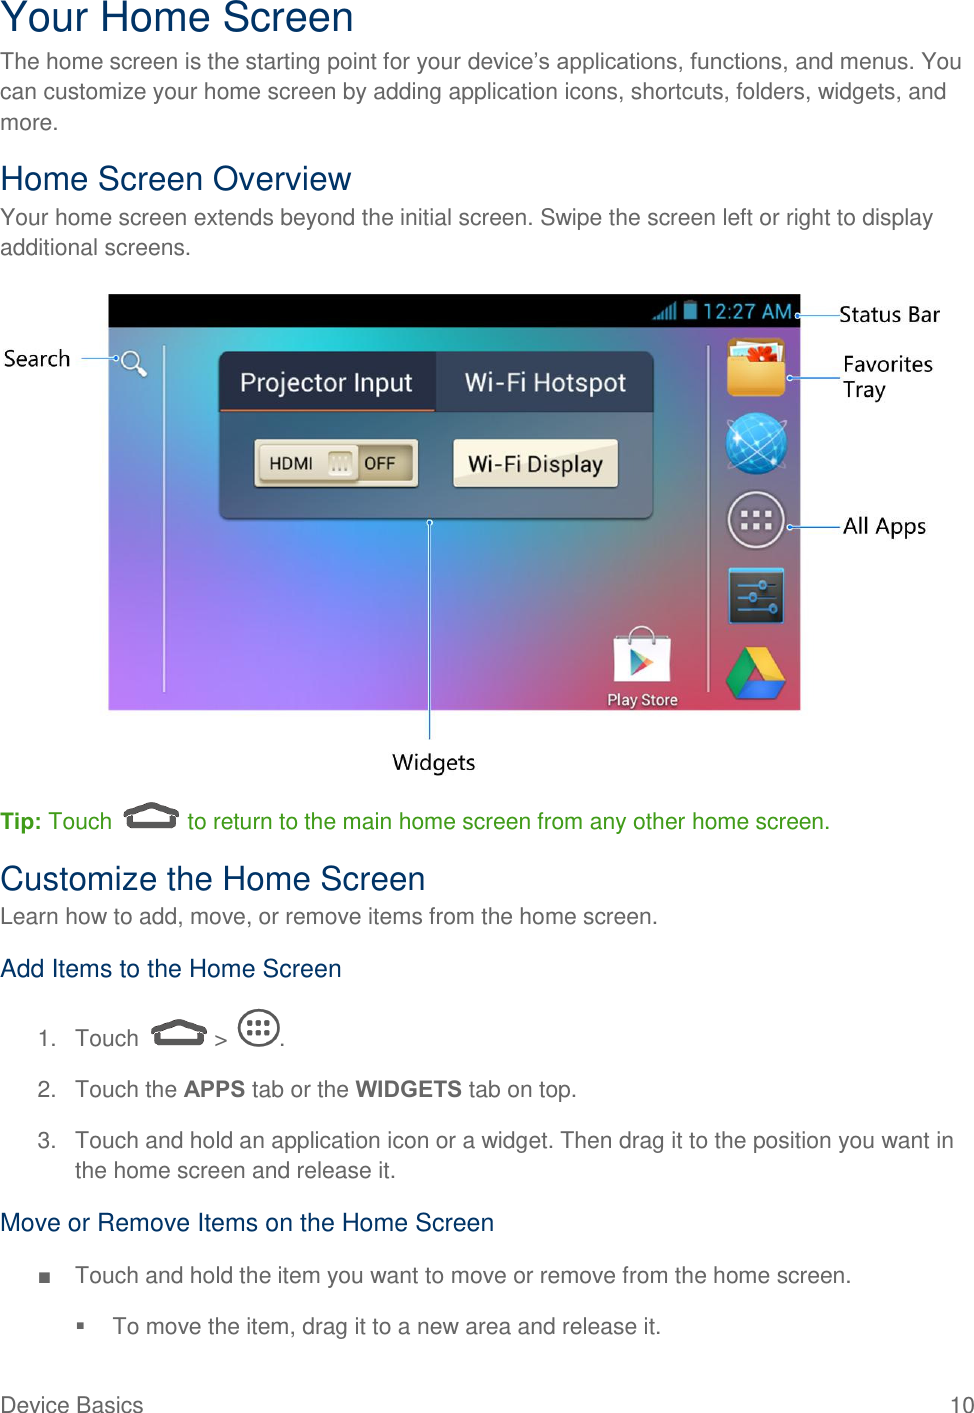  Device Basics  10 Your Home Screen The home screen is the starting point for your device’s applications, functions, and menus. You can customize your home screen by adding application icons, shortcuts, folders, widgets, and more.  Home Screen Overview Your home screen extends beyond the initial screen. Swipe the screen left or right to display additional screens.   Tip: Touch   to return to the main home screen from any other home screen.  Customize the Home Screen Learn how to add, move, or remove items from the home screen. Add Items to the Home Screen 1. Touch   &gt;  . 2.  Touch the APPS tab or the WIDGETS tab on top. 3.  Touch and hold an application icon or a widget. Then drag it to the position you want in the home screen and release it. Move or Remove Items on the Home Screen ■  Touch and hold the item you want to move or remove from the home screen.   To move the item, drag it to a new area and release it. 